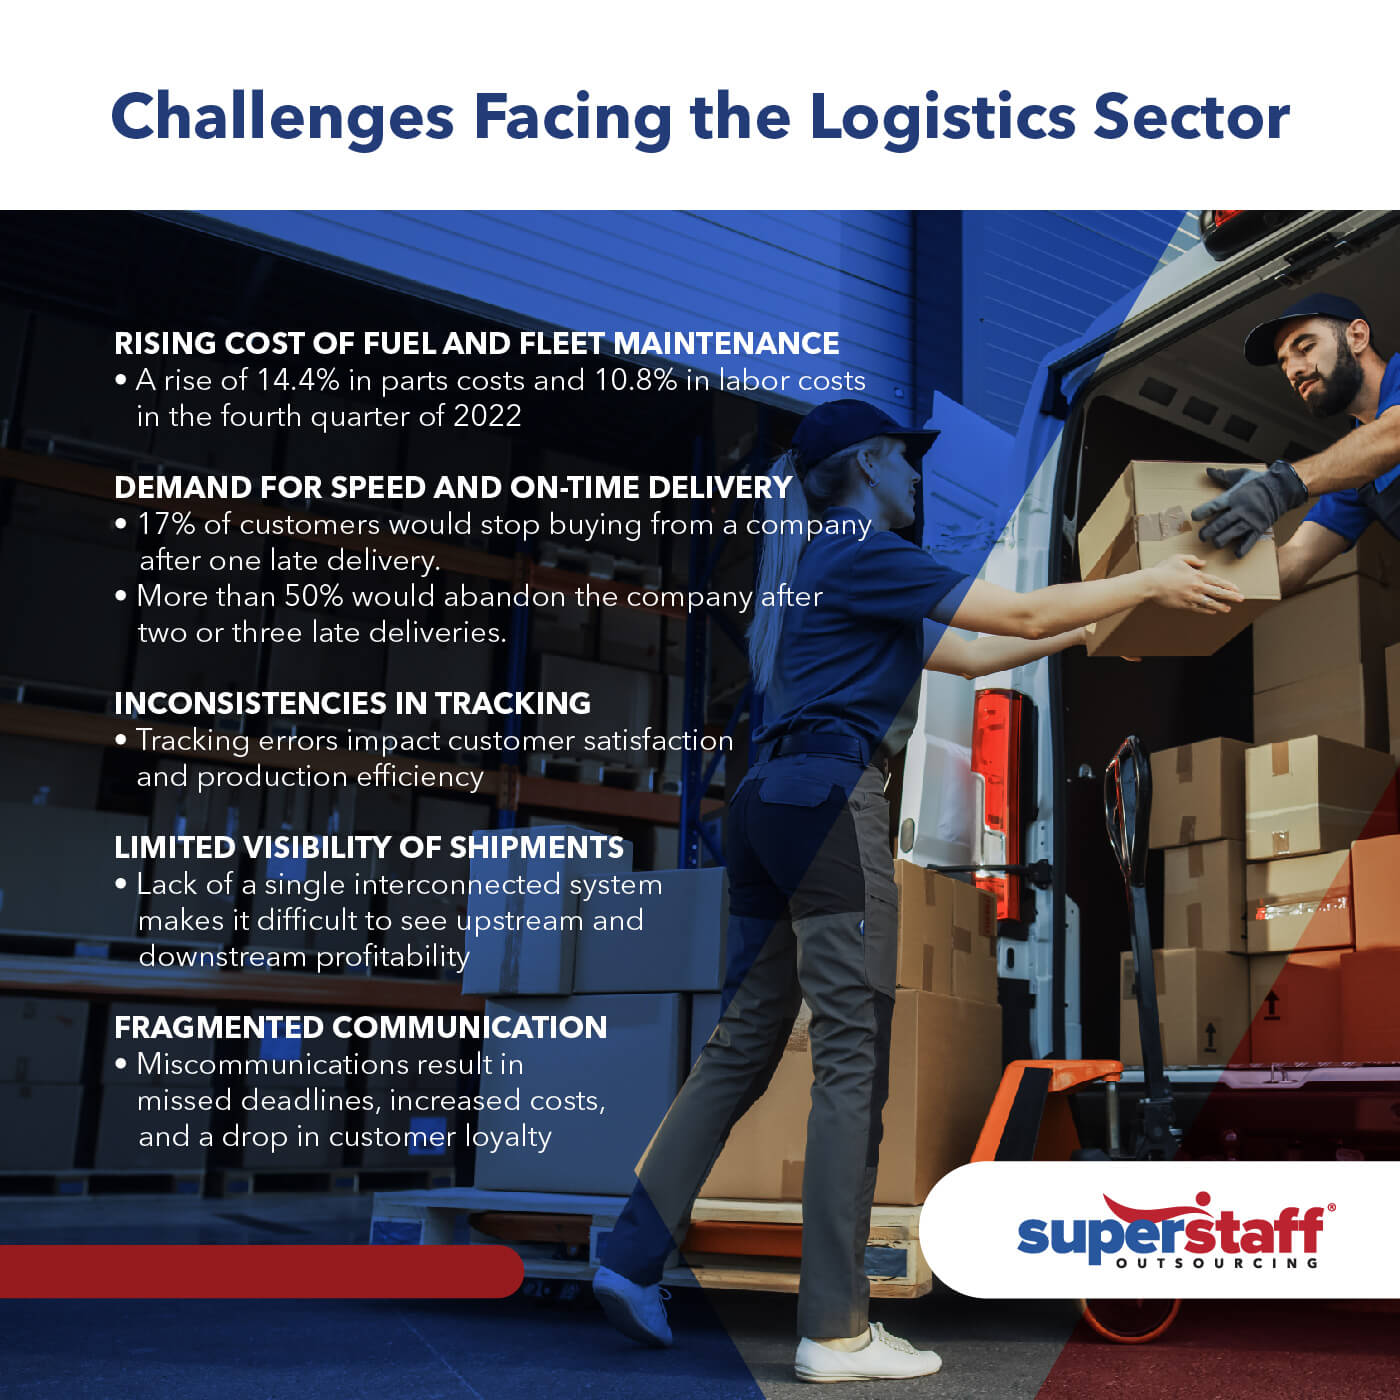 Challenges Facing the Logistics Sector Infographic